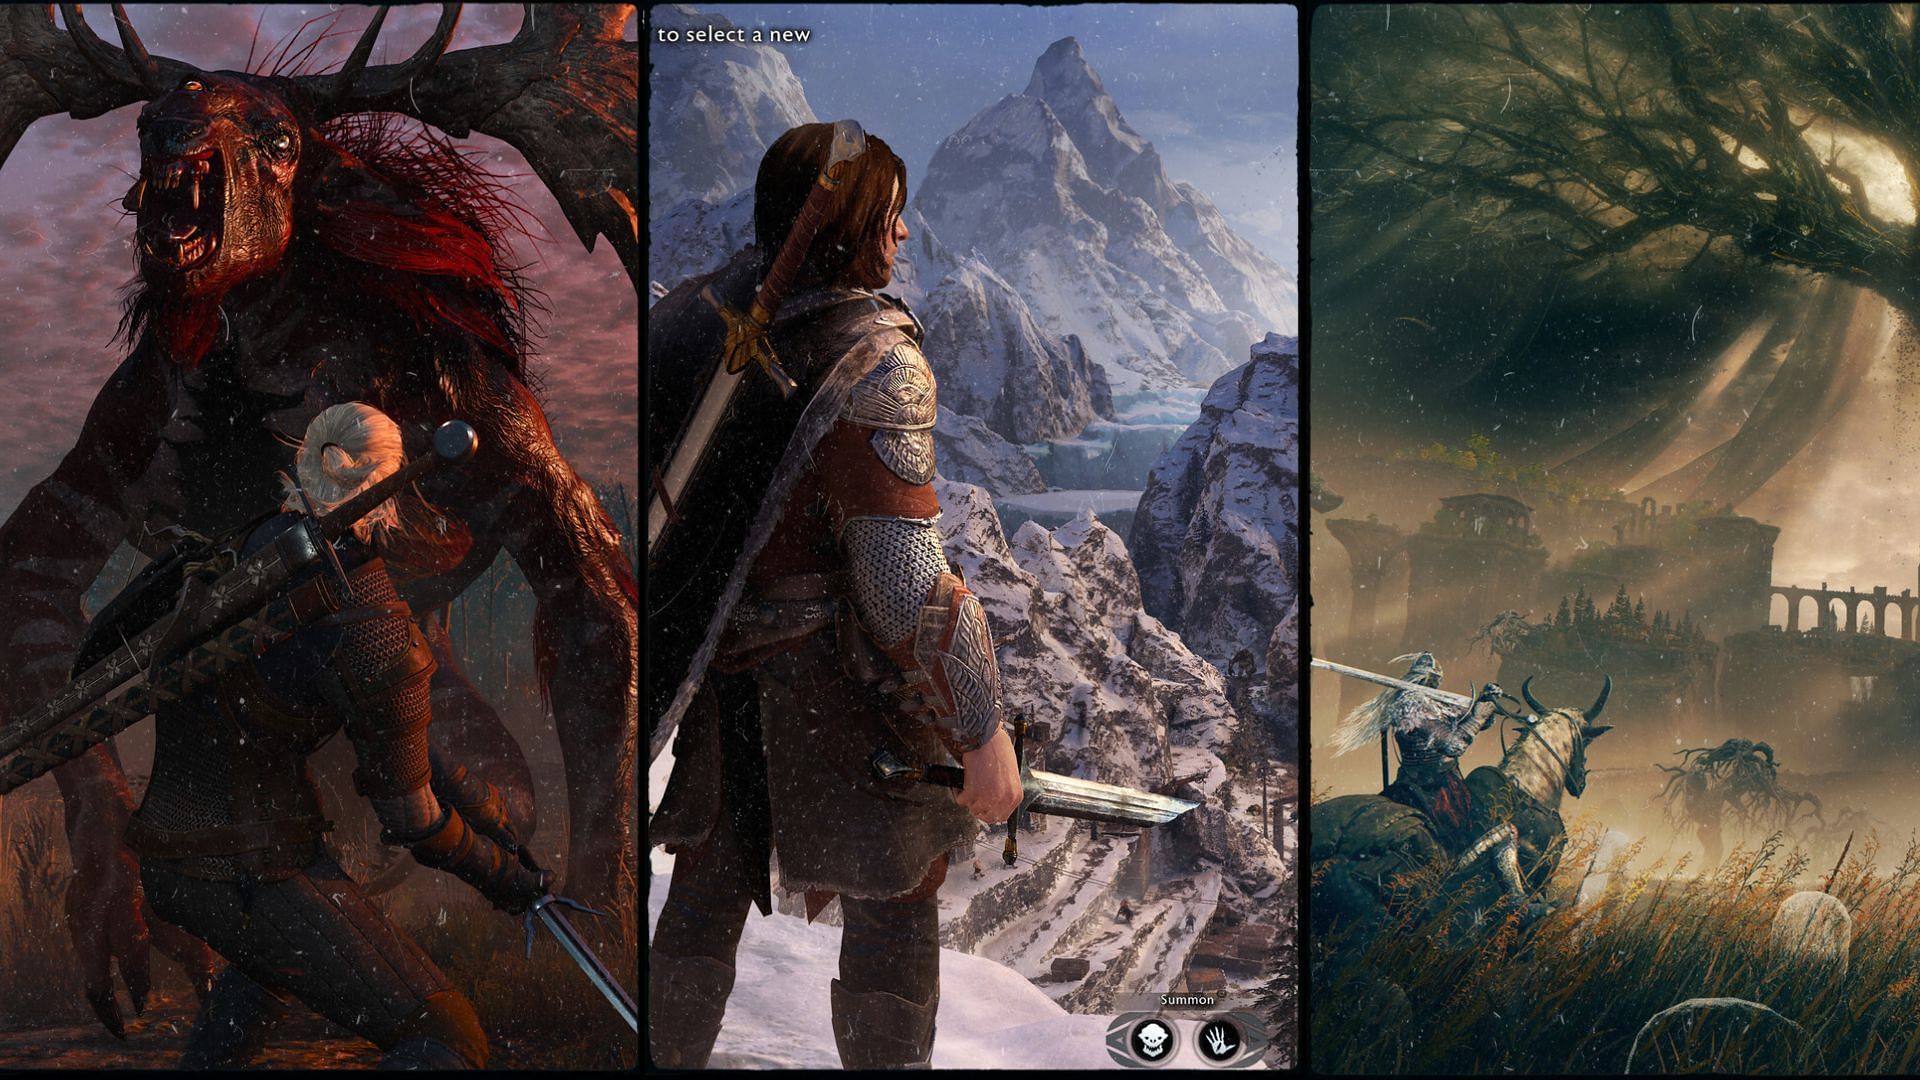 Screenshots from Witcher 3, Elden Ring and Shadow of War